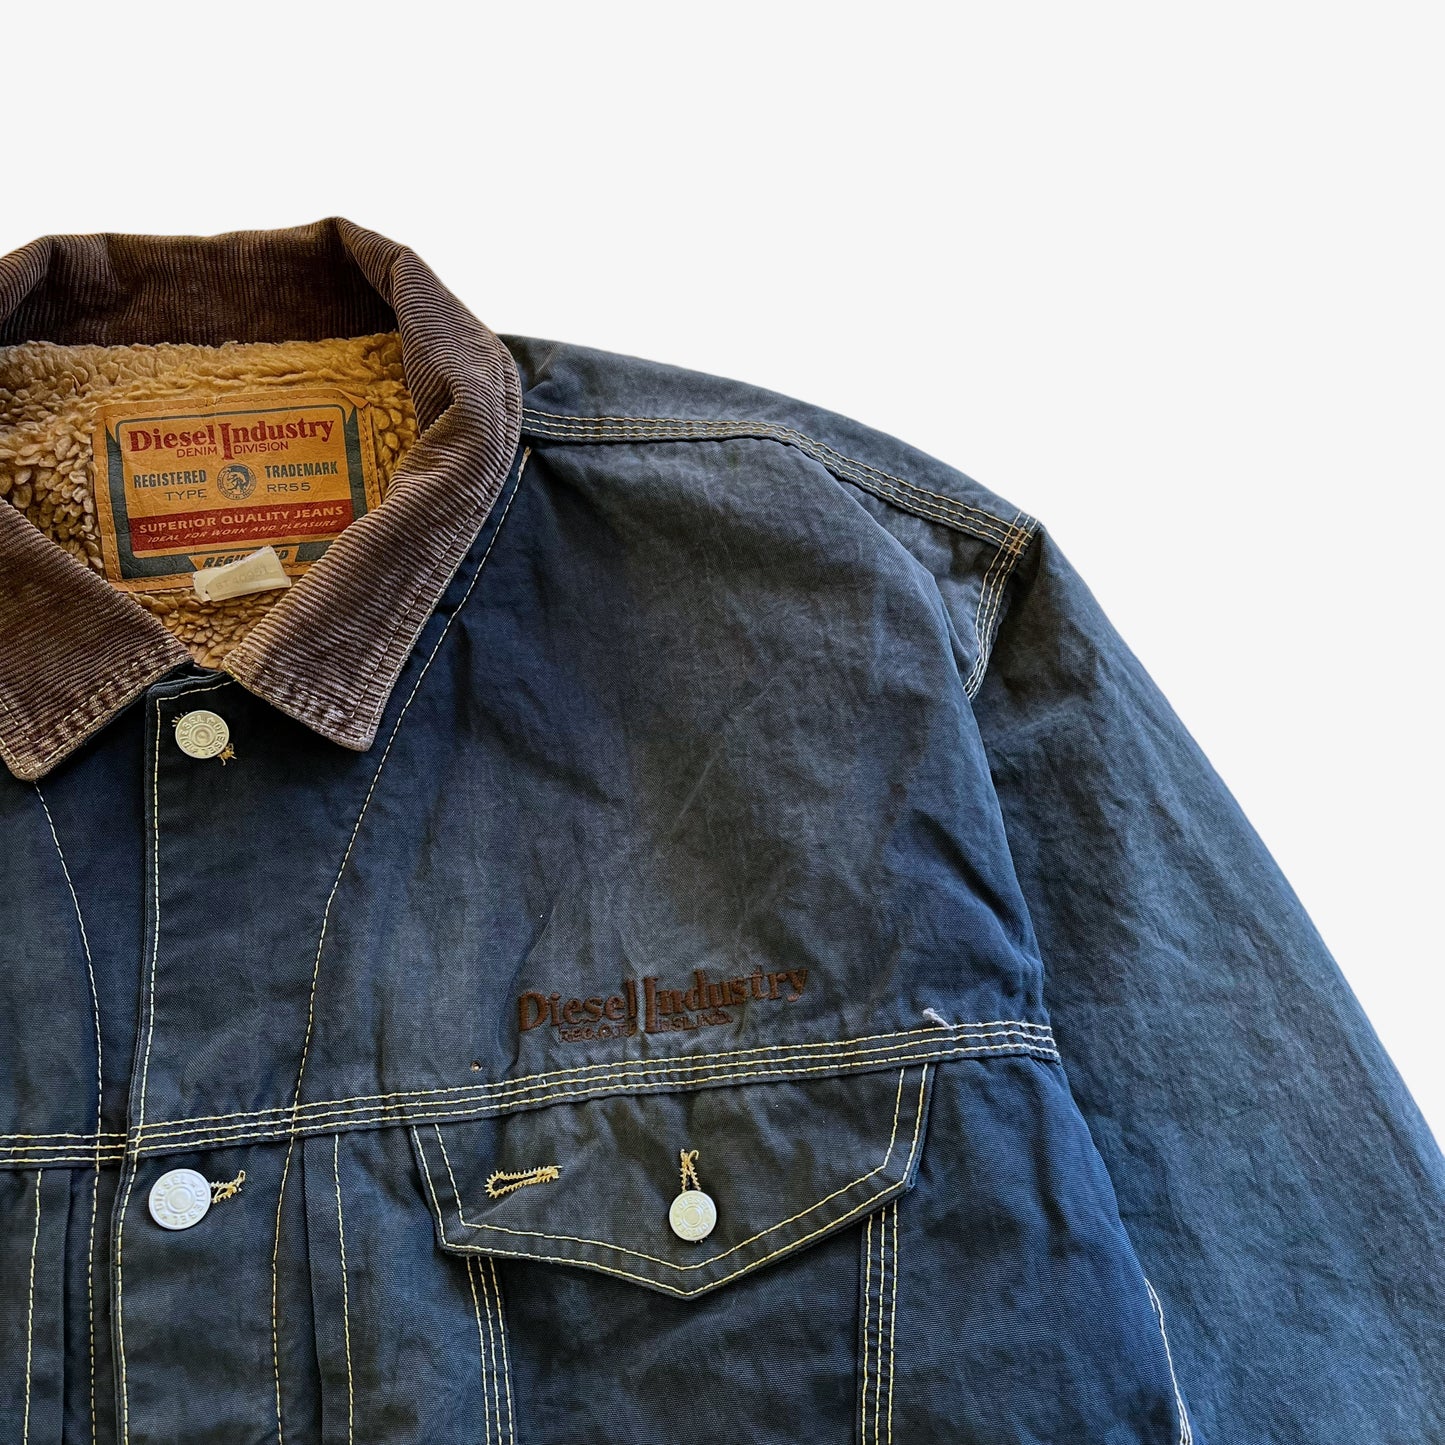 Vintage 90s Diesel Industry Trucker Jacket With Corduroy Collar And Sherpa Lining Logo - Casspios Dream